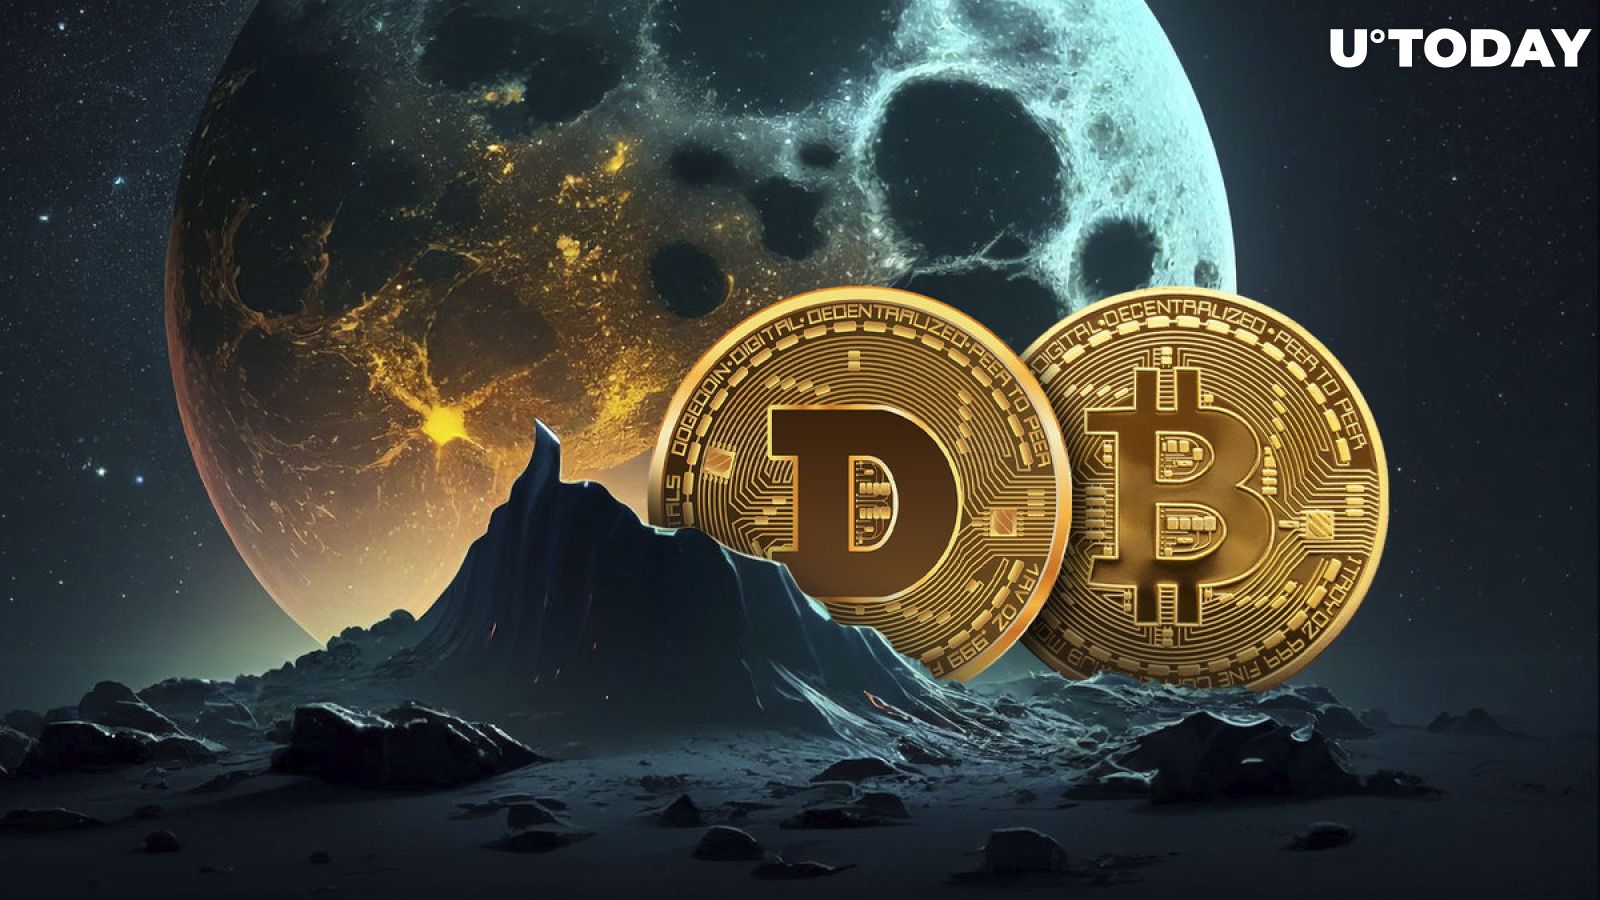 Physical DOGE, BTC, Bitcoin Genesis Plate to Head to Moon on Dec. 23 This Year: Details